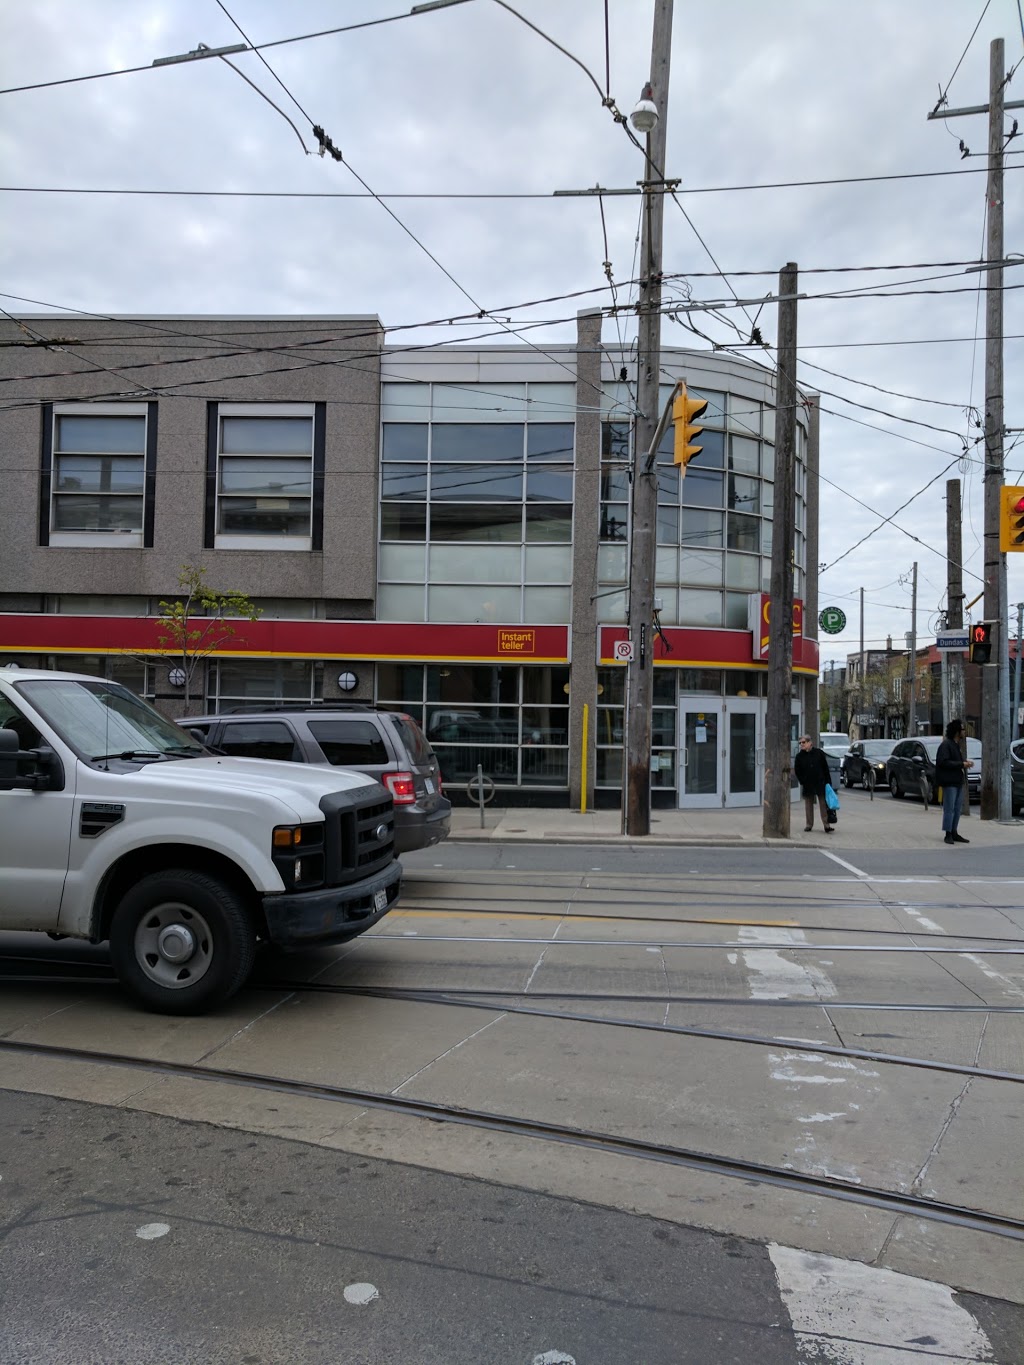 CIBC Branch with ATM | bank | 235 Ossington Ave, Toronto, ON M6J 2Z8, Canada | 4165883478 OR +1 416-588-3478